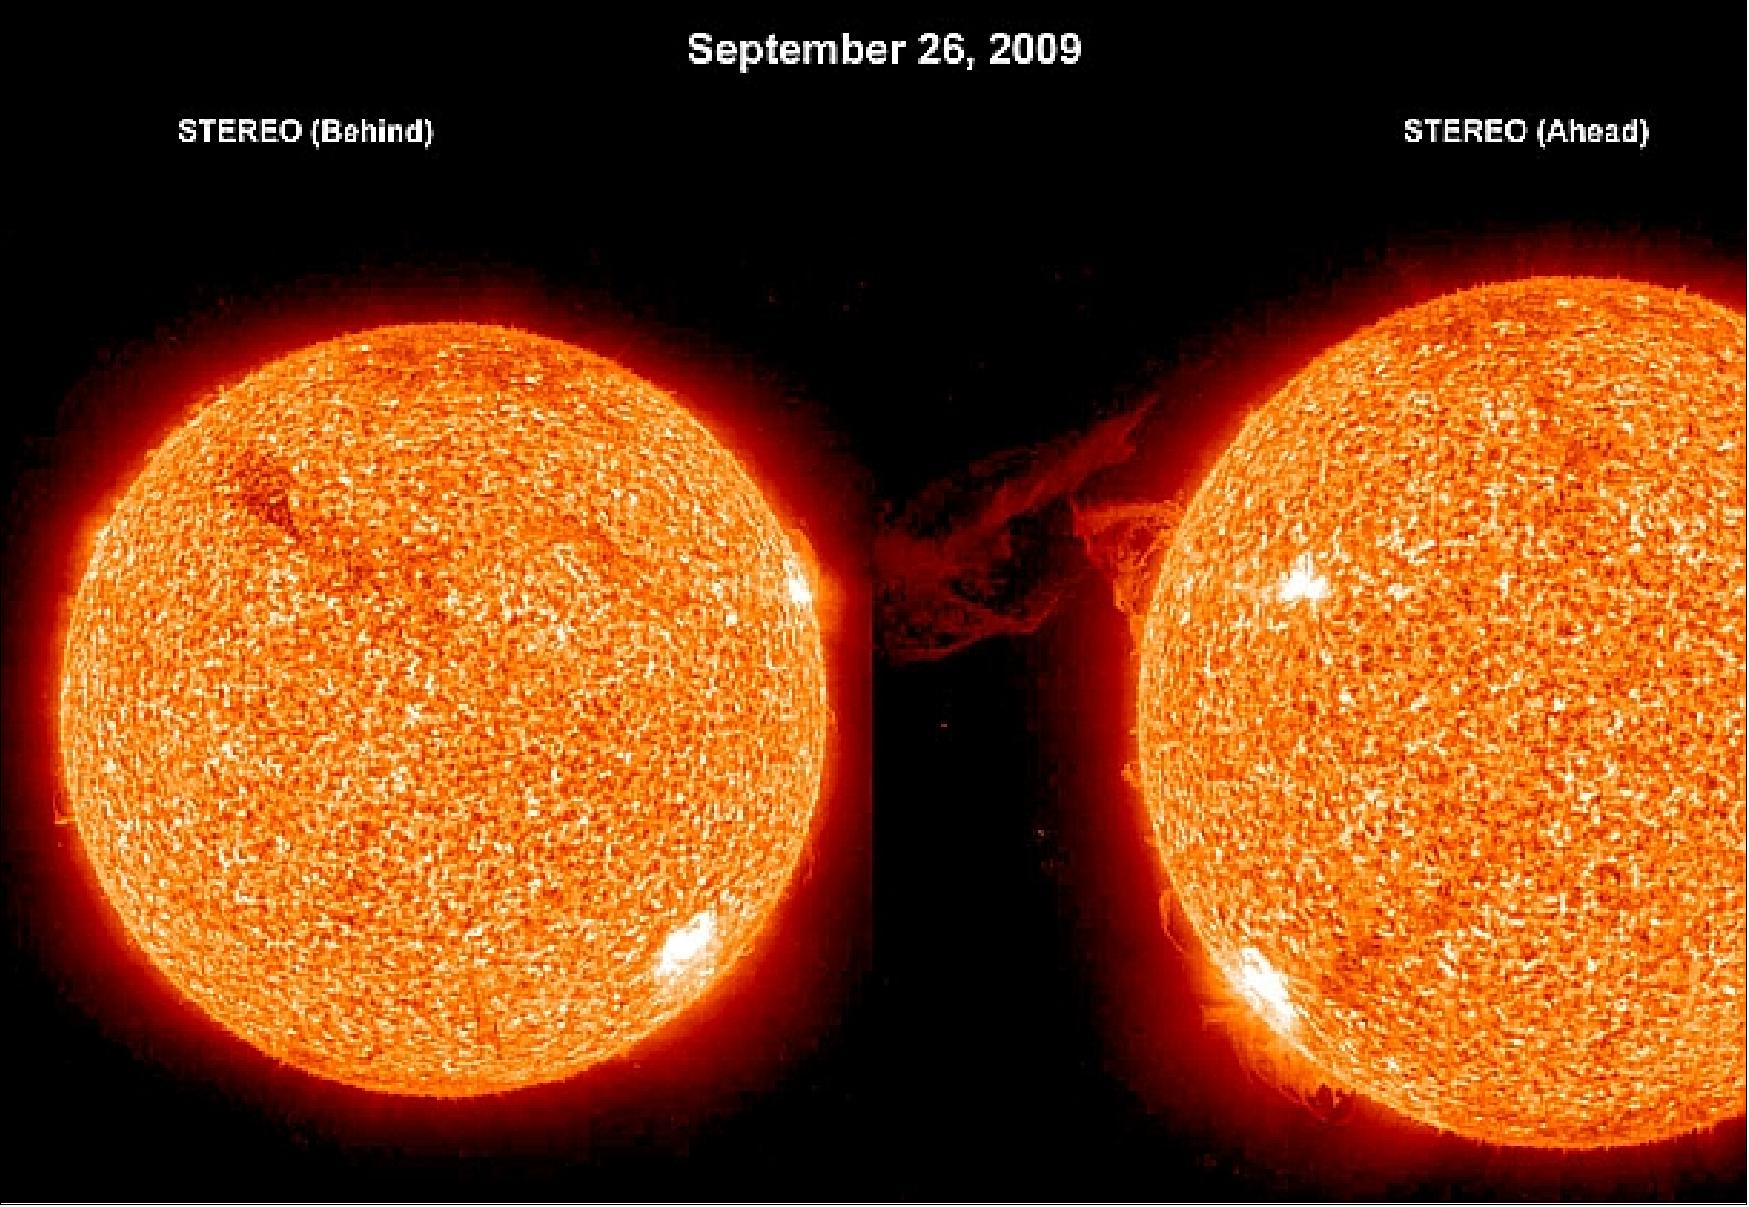 Figure 37: Image composition of an eruption on the Sun taken by the STEREO twin spacecraft constellation (image credit: NASA)